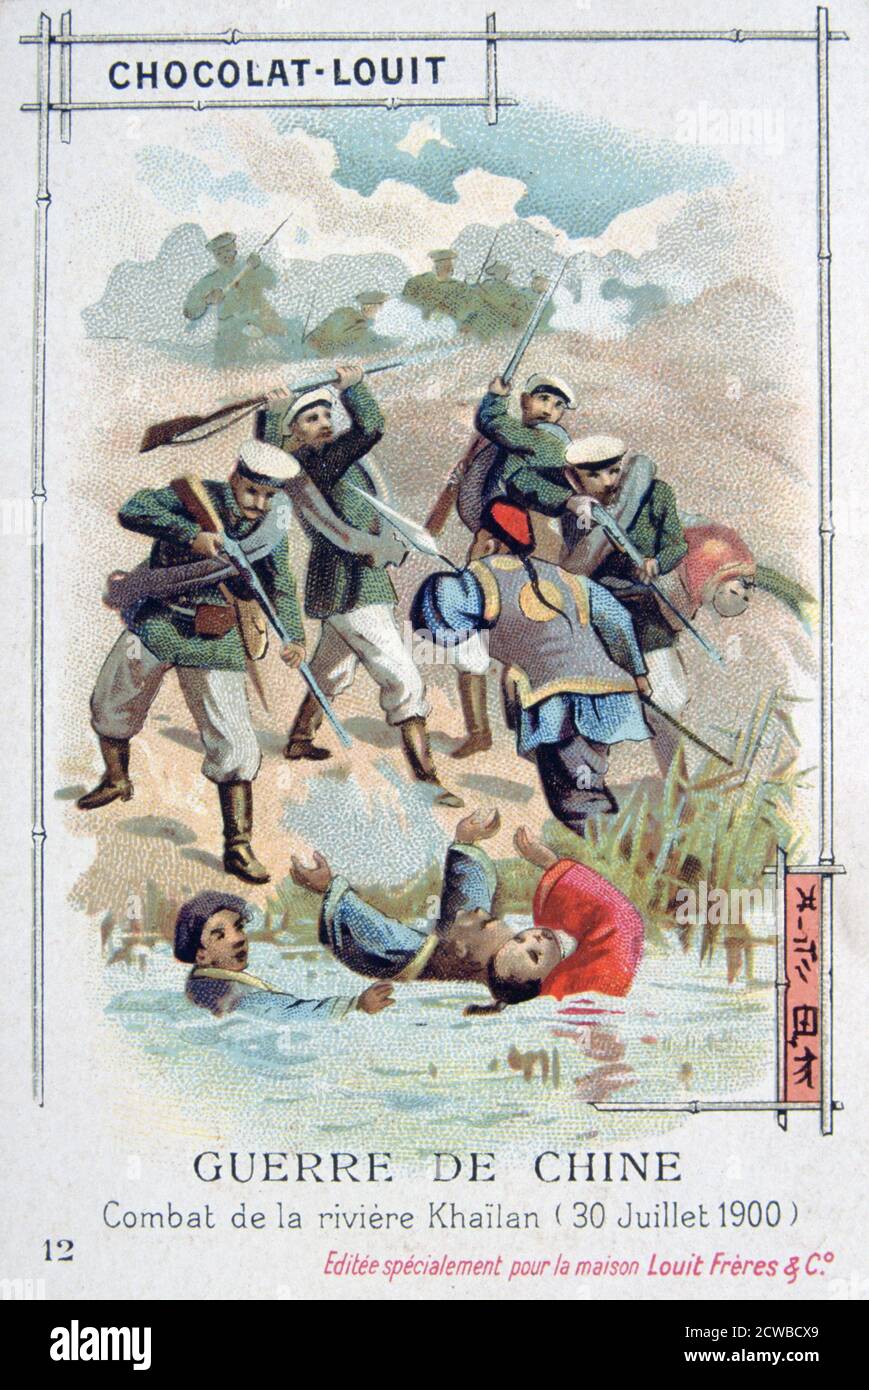 Battle at the Khailan River, China, Boxer Rebellion, 30 July 1900. The Boxer Uprising or Boxer Rebellion was a Chinese rebellion from November 1899 to September 7, 1901 against foreign influence in trade, politics, religion and technology in China during the final years of the Qing Dynasty. The assassination of the German ambassador and the siege of foreign diplomatic legations in Peking prompted Britain, France, Germany, the US, Russia, Japan, Italy and Austria-Hungary to form the Eight Nation Alliance and intervene militarily. French trading card advertising Chocolat-Louit. The artist is unk Stock Photo